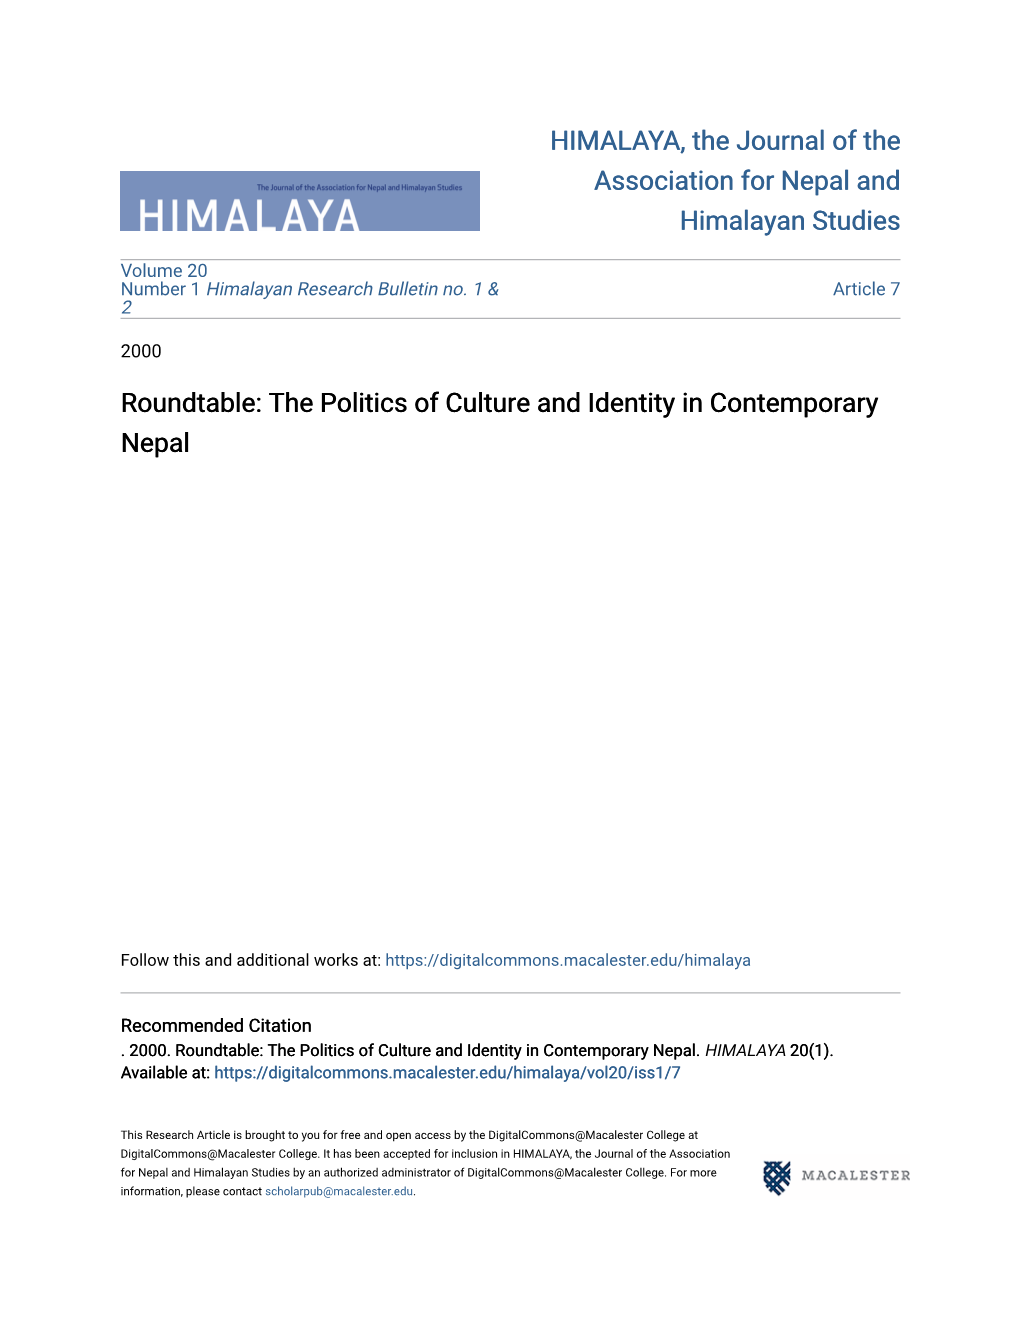 The Politics of Culture and Identity in Contemporary Nepal